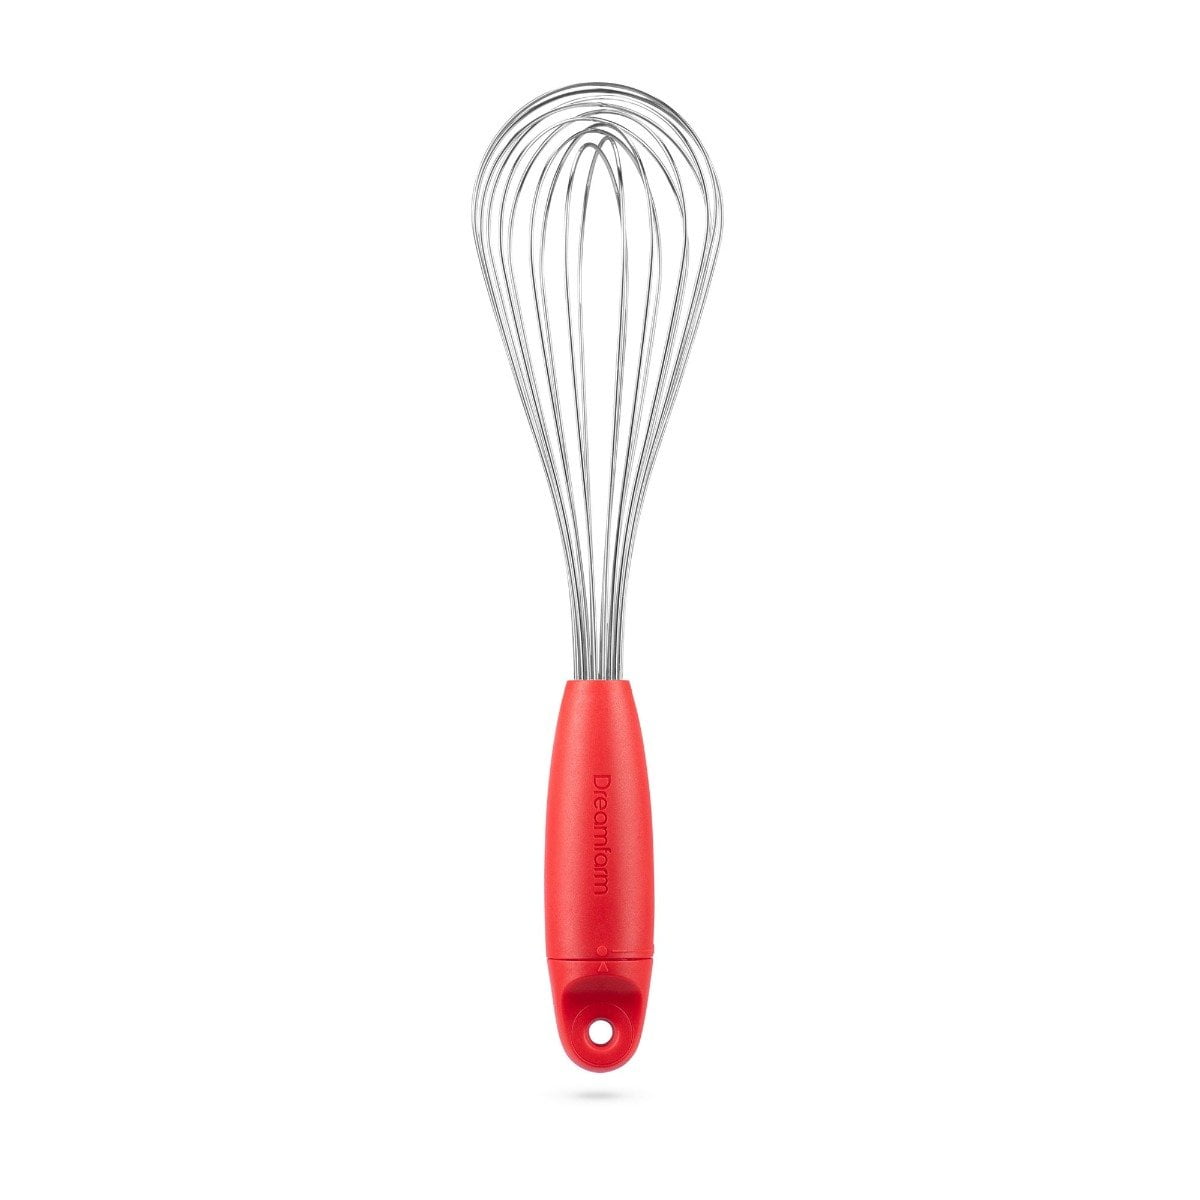 Whisk Wiper Clean Whisks Without Mess Egg Liquid Cleaner Red - AliExpress